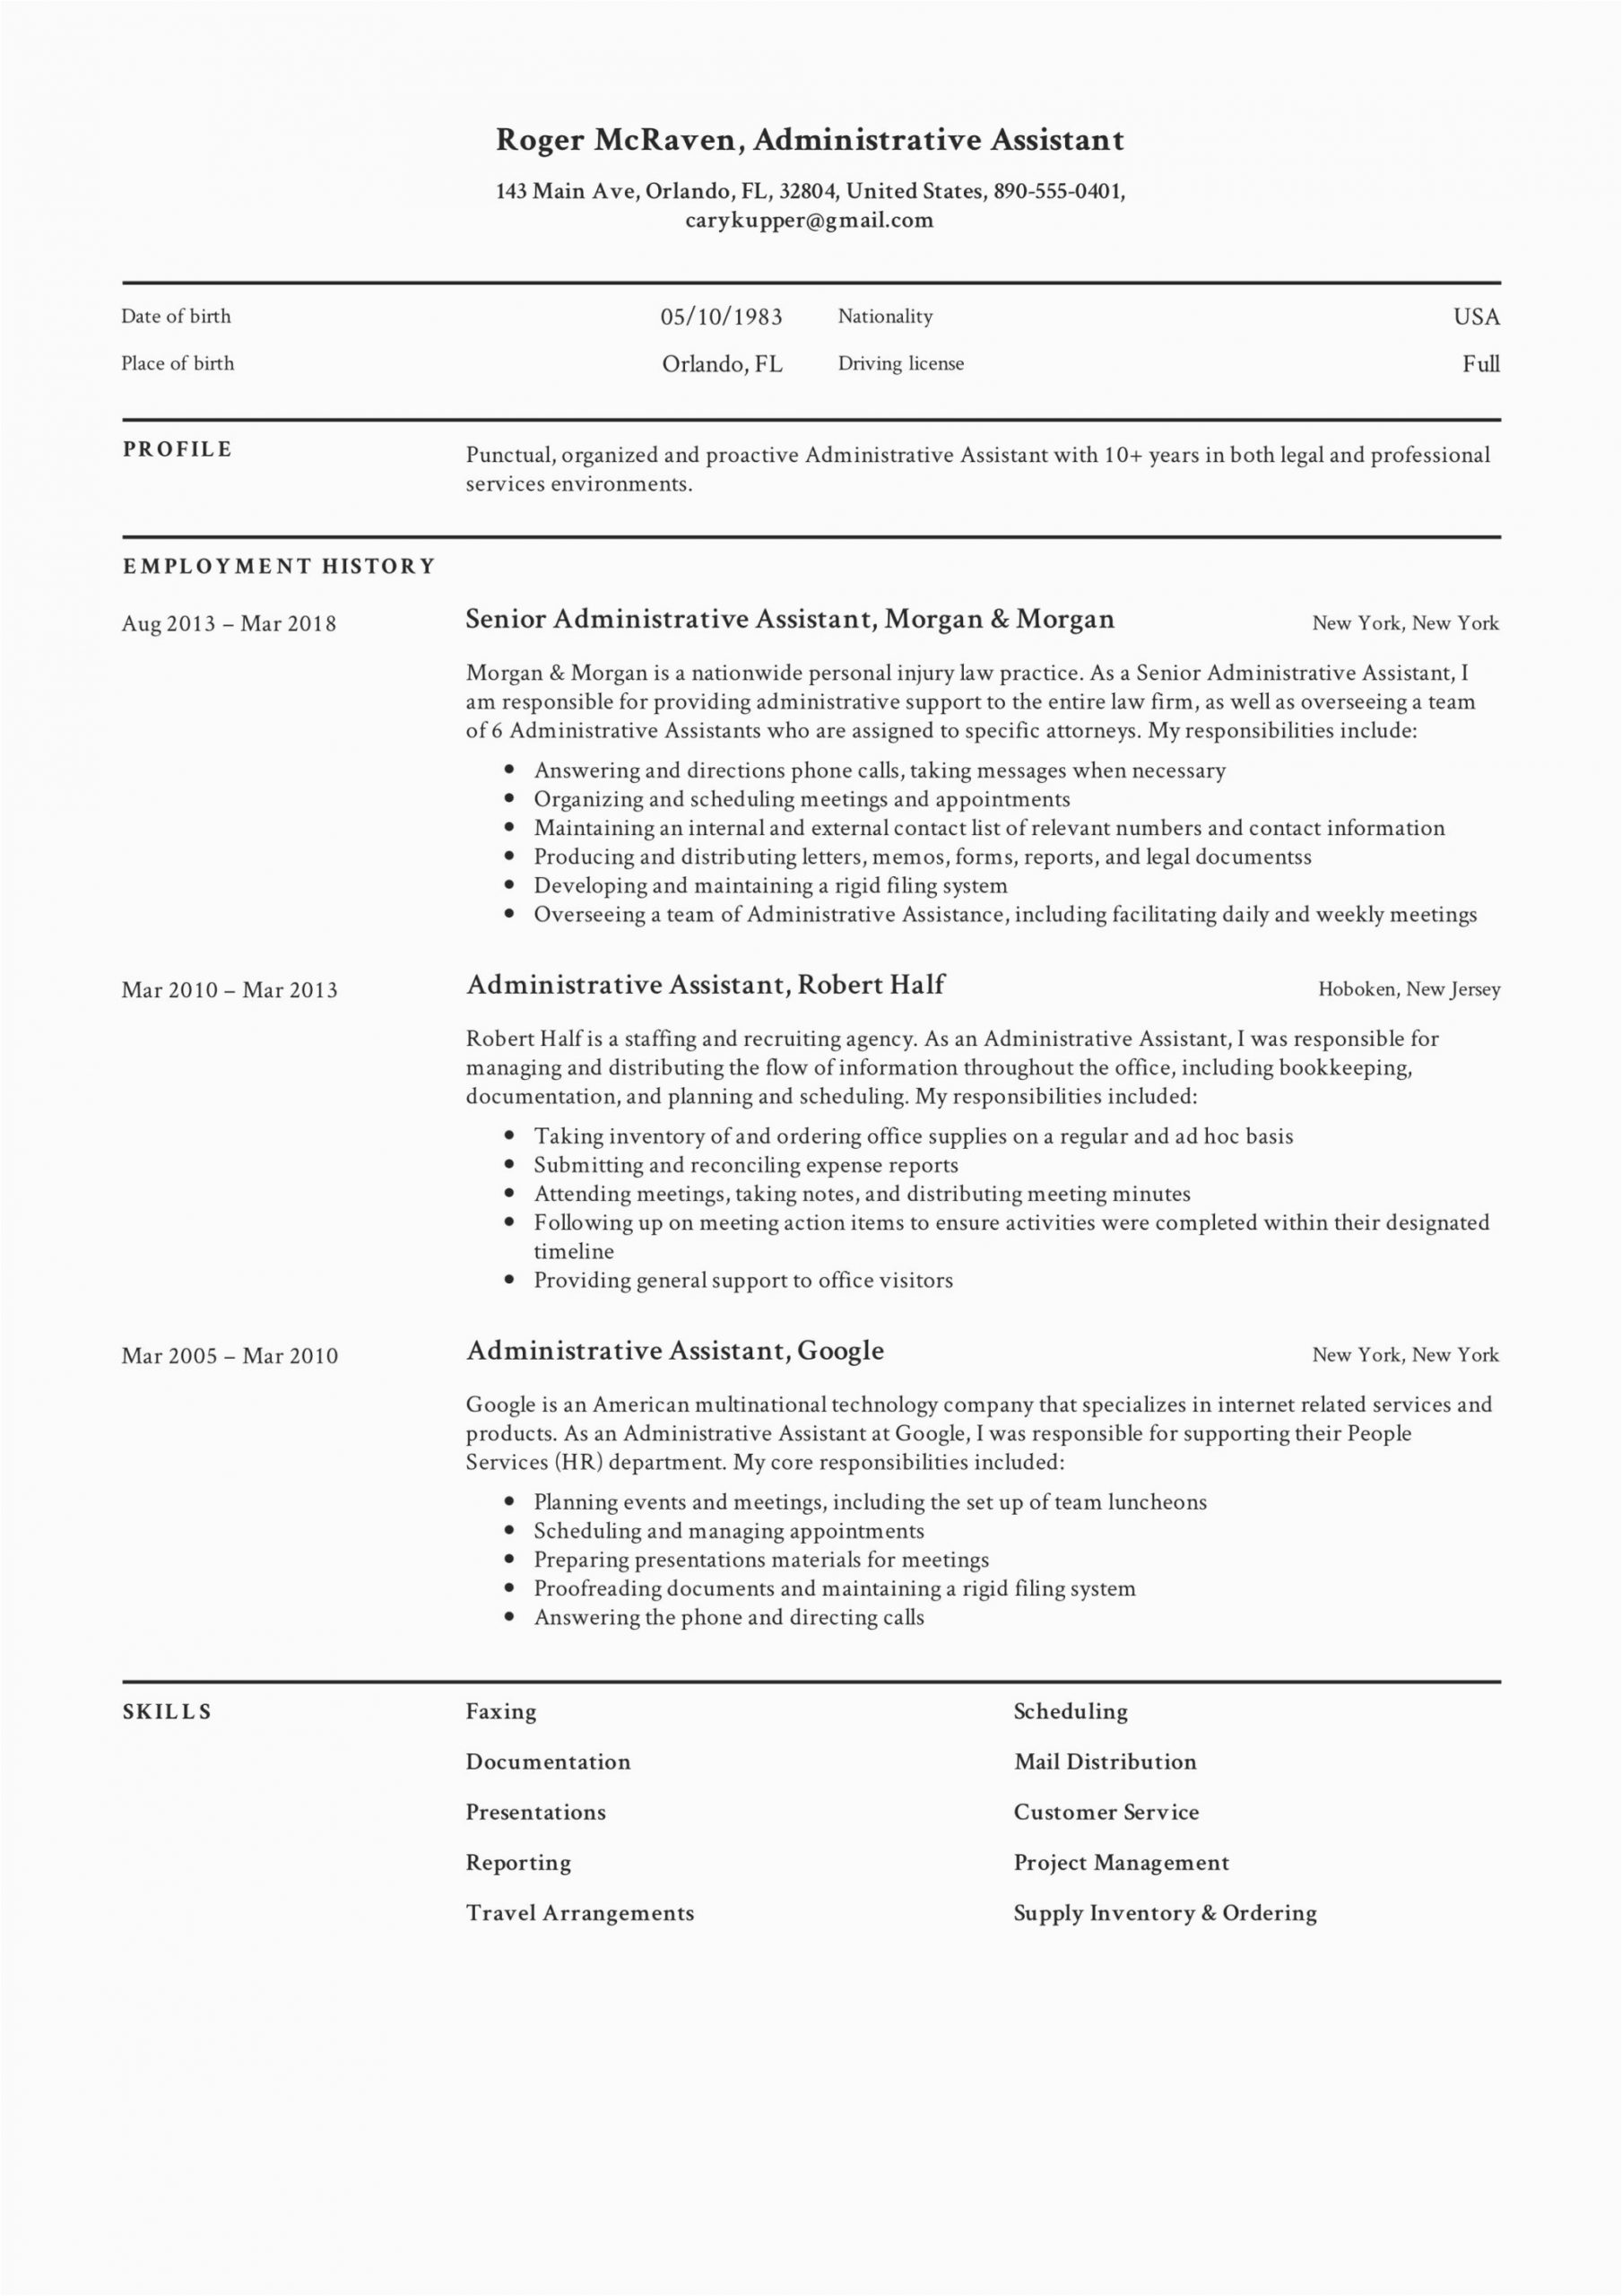 Best Resume Sample for Admin assistant 19 Free Administrative assistant Resumes & Writing Guide